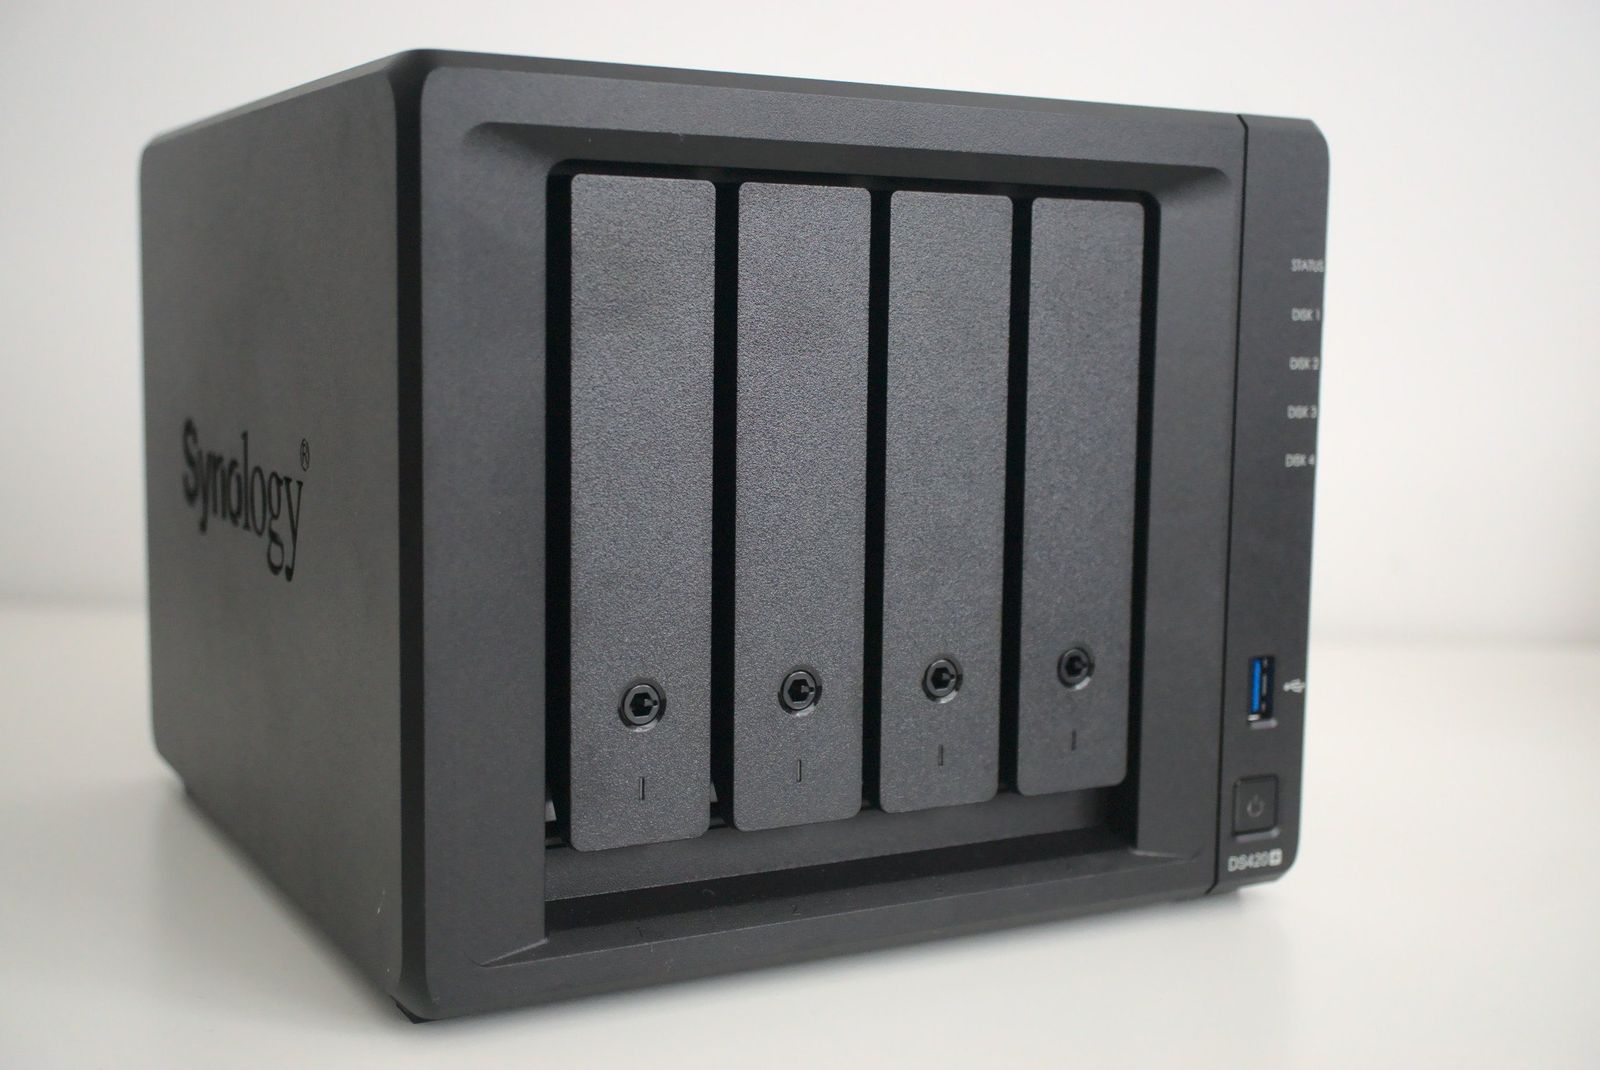 Synology ds maurice chevalier